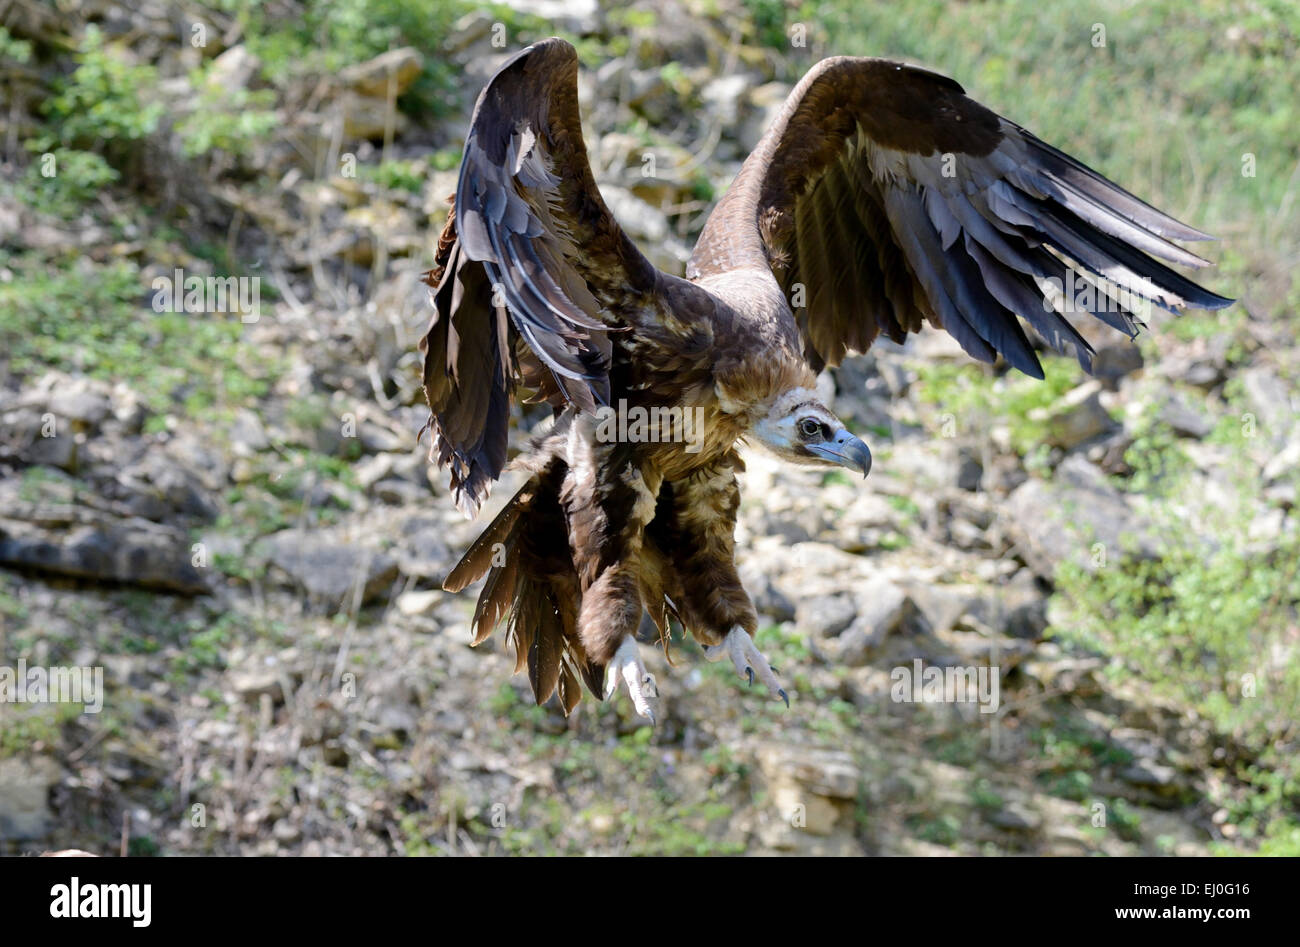 cinereous vulture, Aegypius monachus, birds, accipitrids, old world vultures, vultures, scavengers, animals, Germany, Europe, Stock Photo